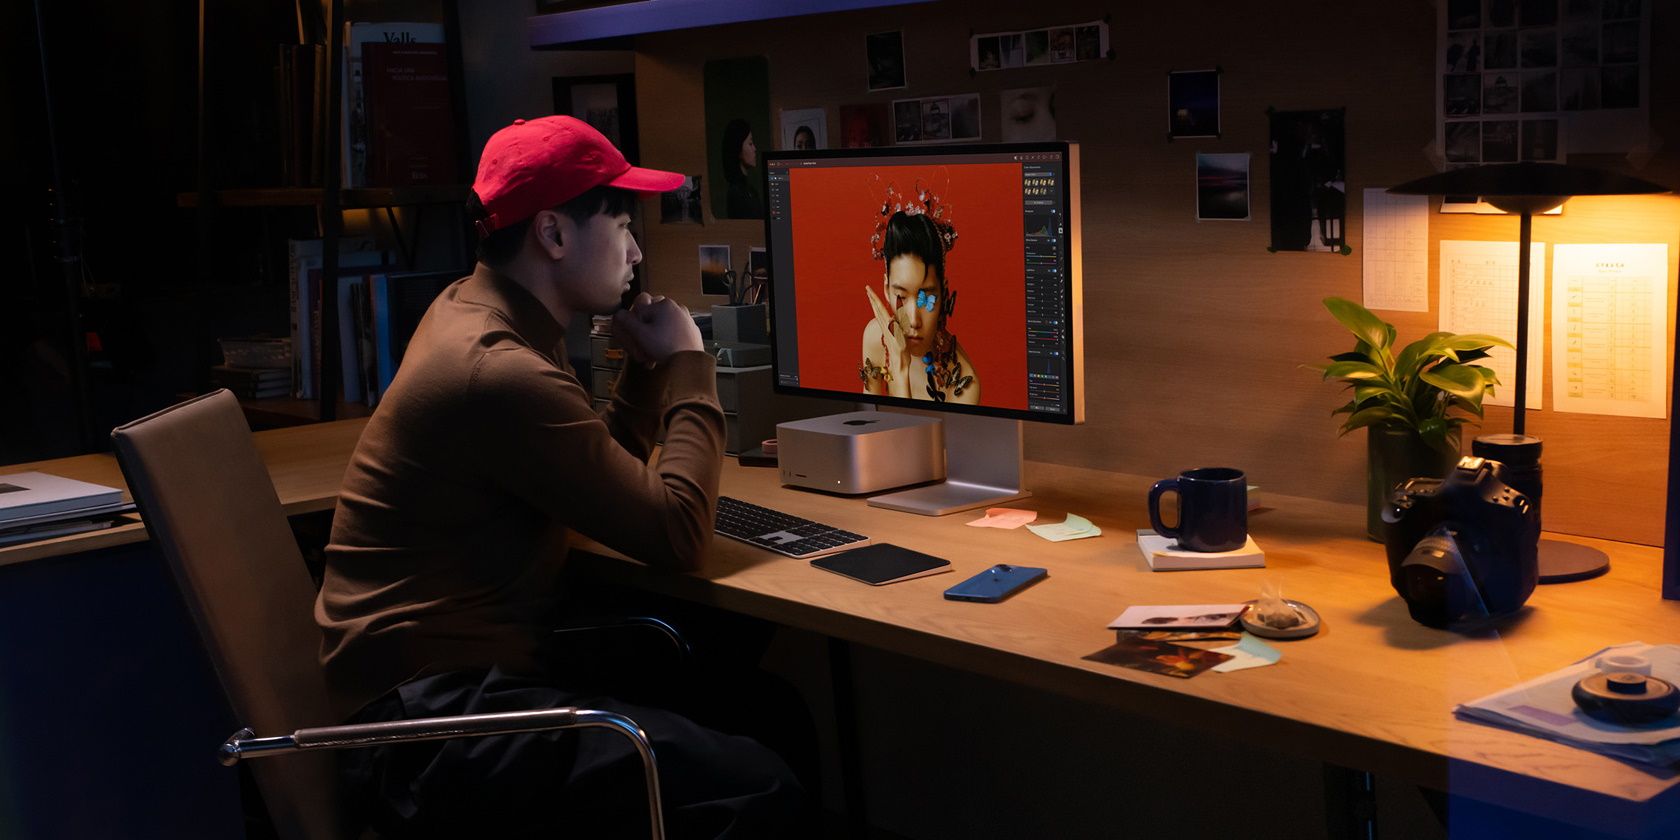 2022 Samsung M8 4K monitor + TV: DON'T bother with Apple's Studio Display,  get THIS instead 